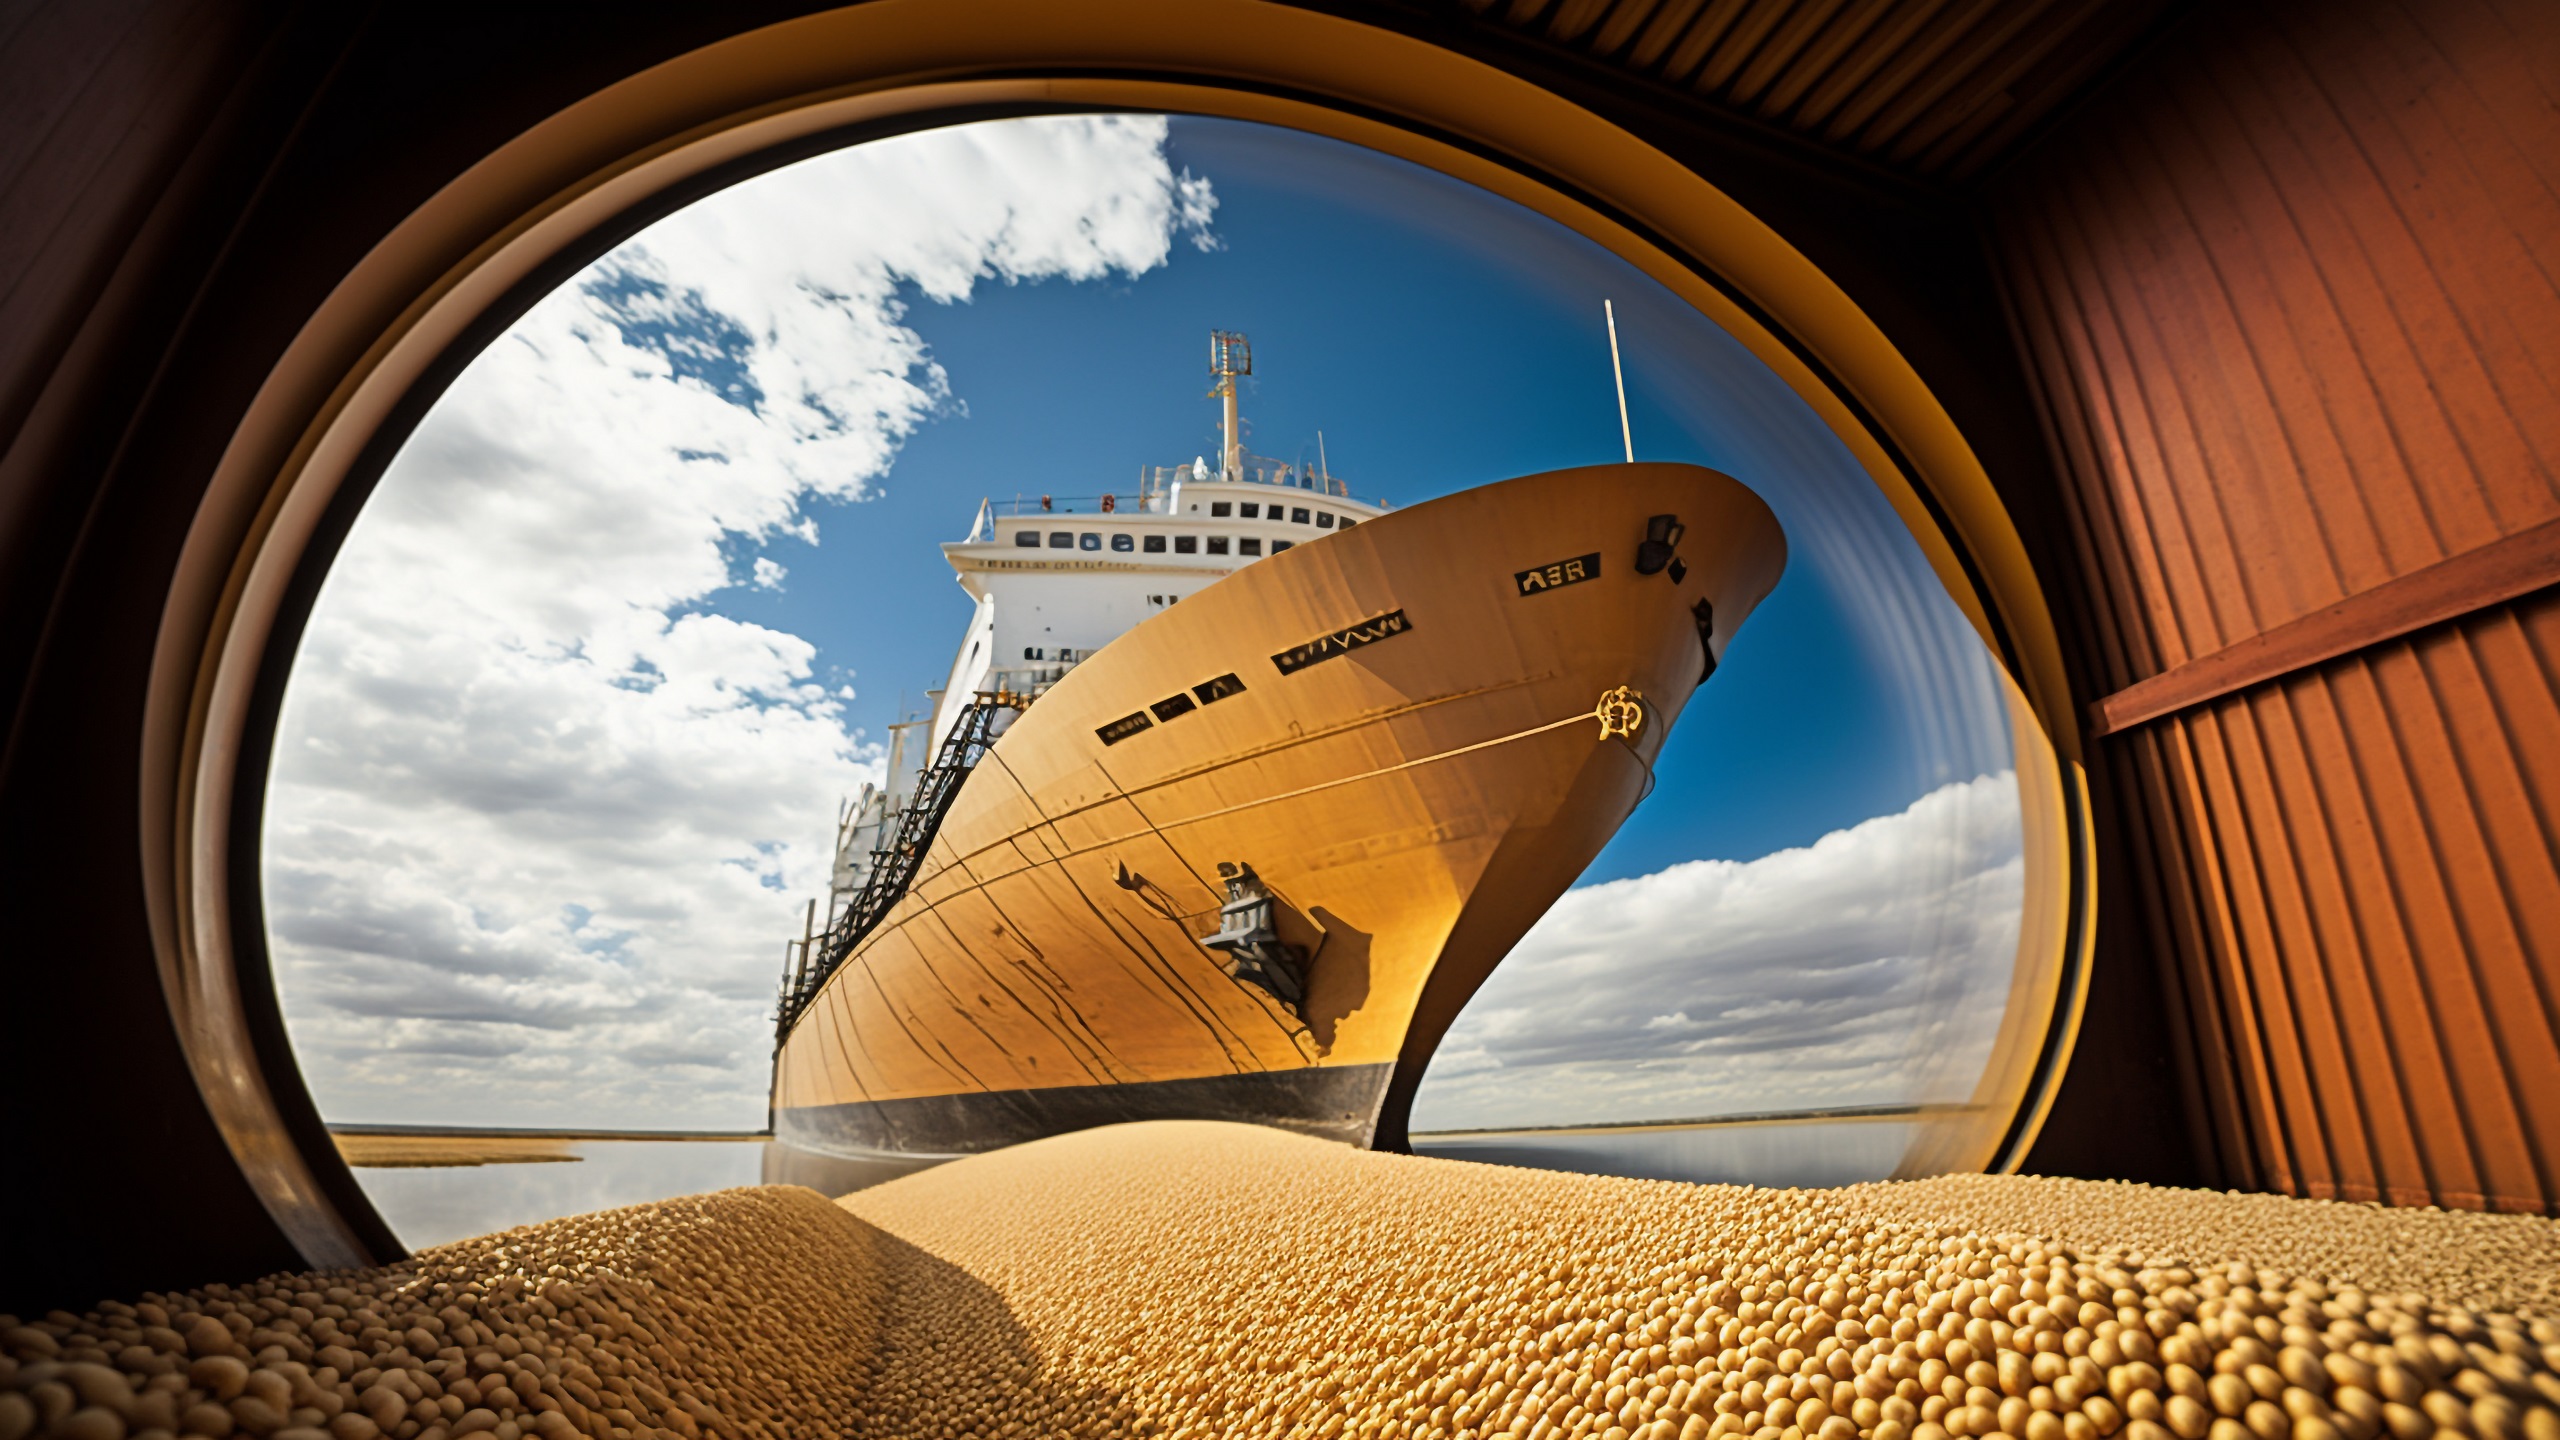 Black Sea Grain Initiative Extended for 2 Months Amid Global Supply Chain Concerns